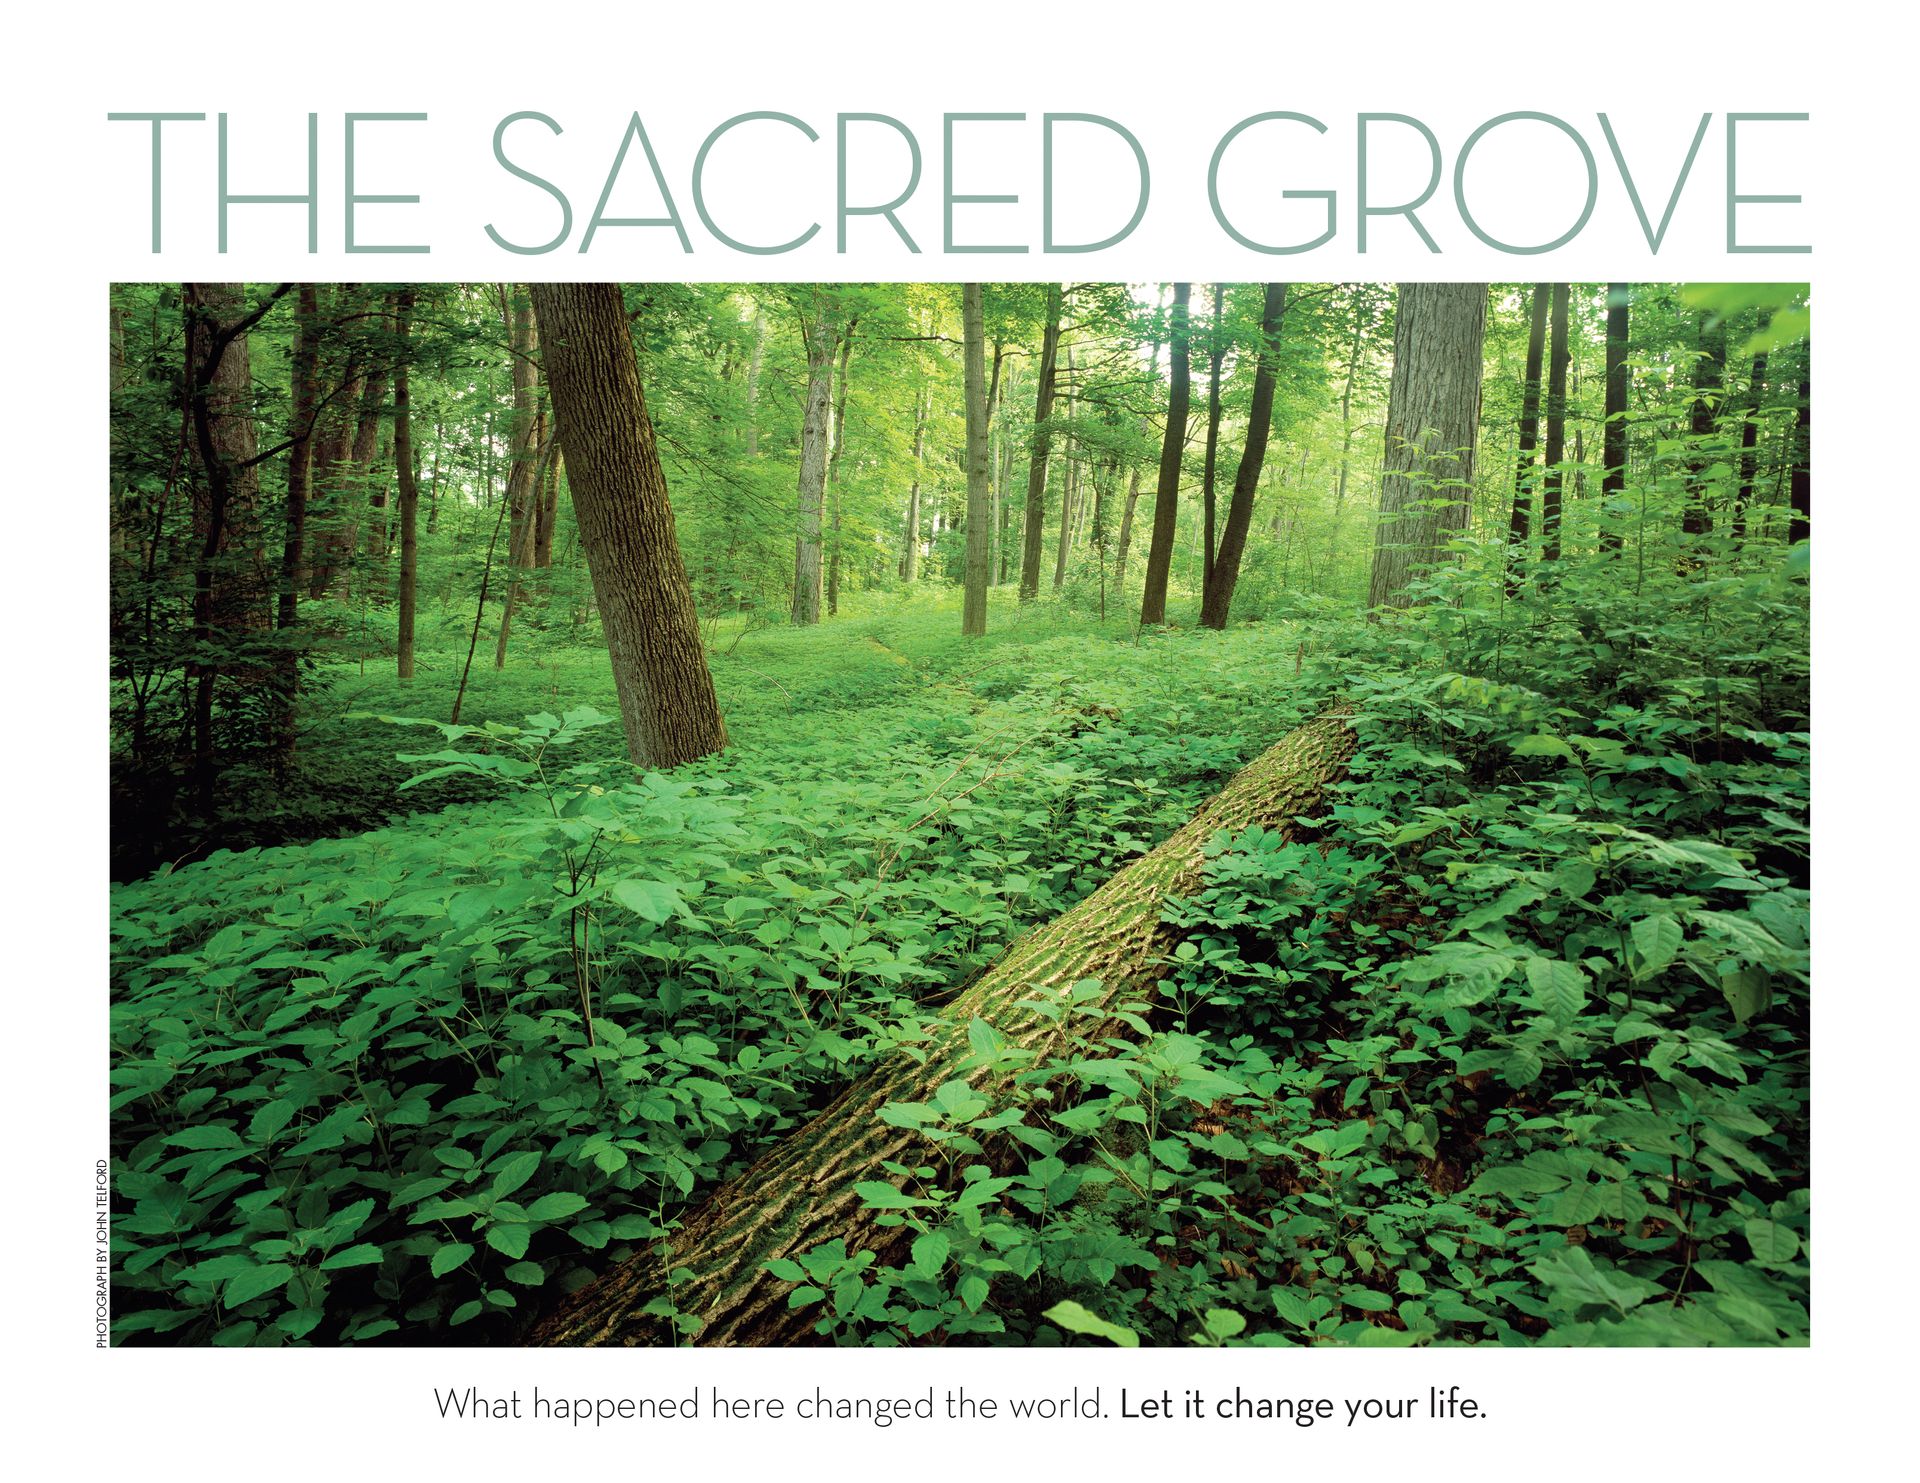 The Sacred Grove: What happened here changed the world. Let it change your life. June 2011 © undefined ipCode 1.